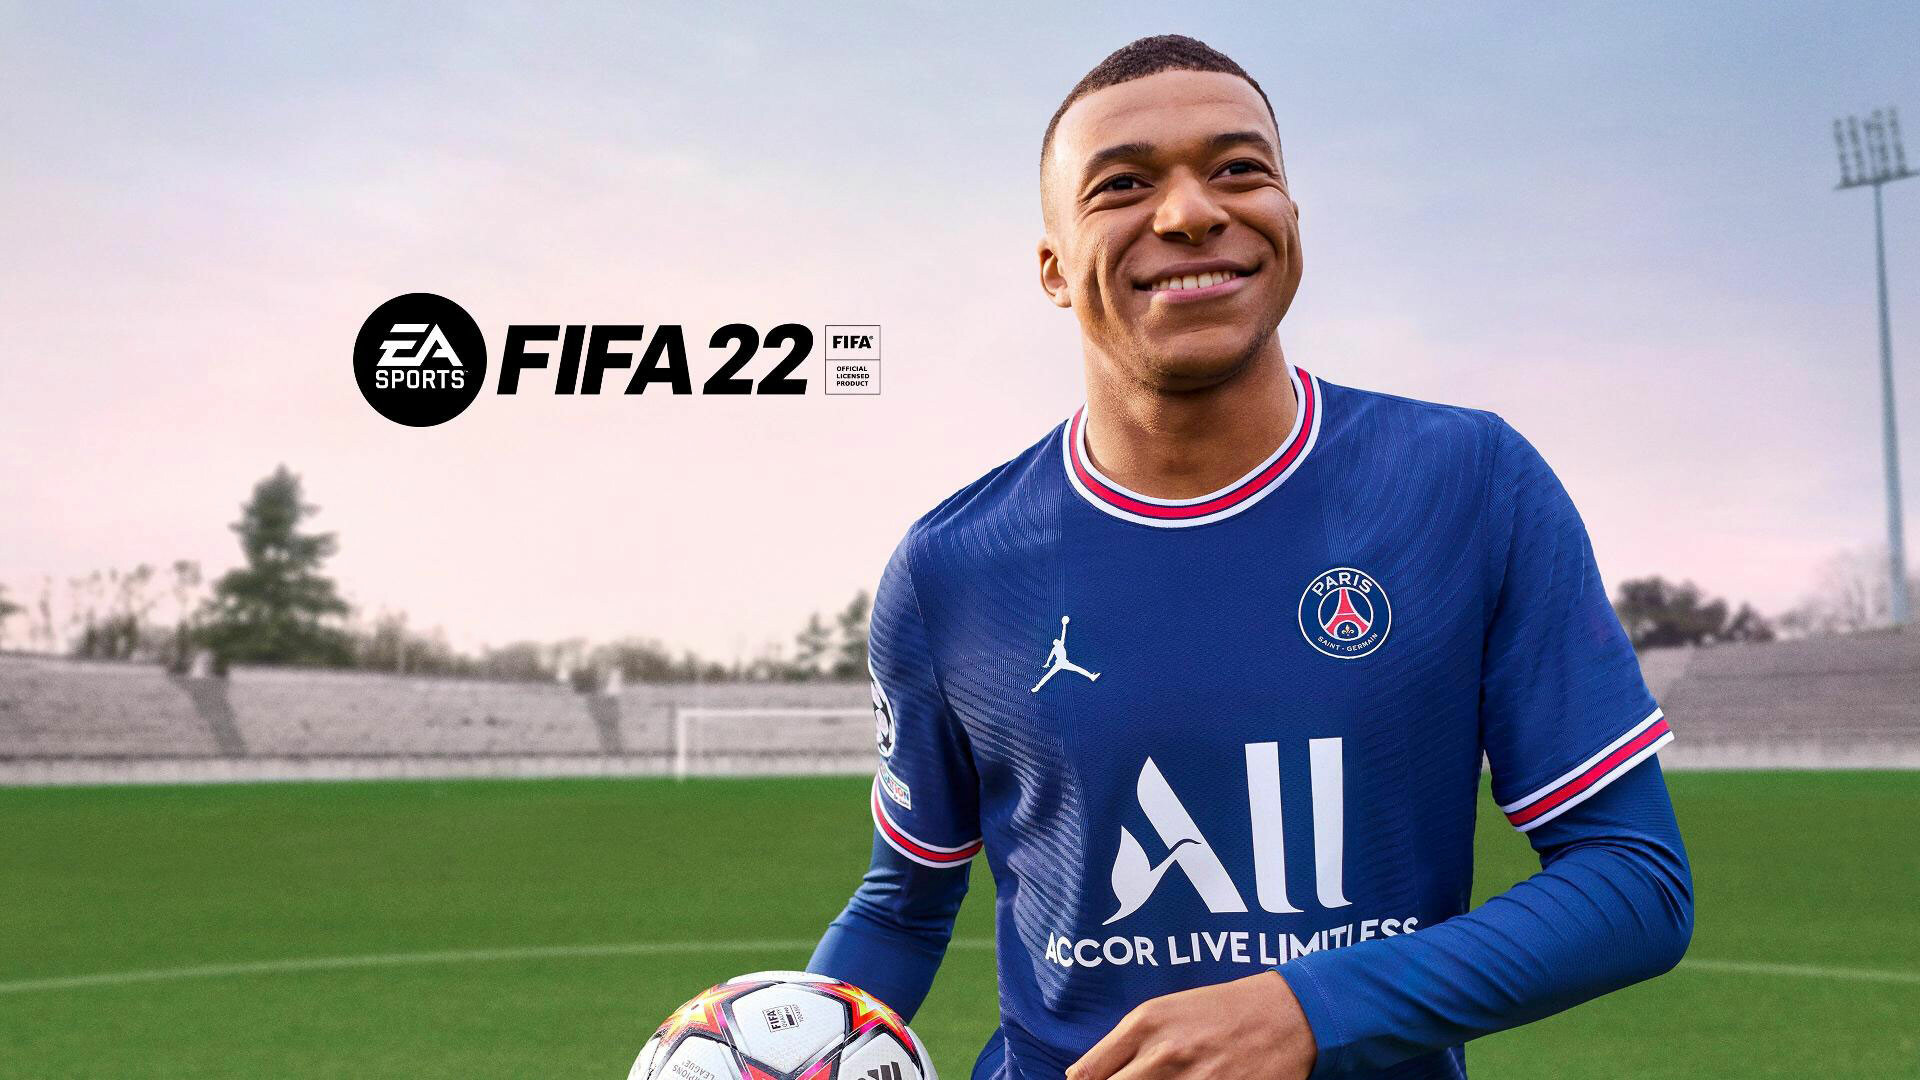 FIFA: Kylian Mbappe, The cover athlete for the second consecutive year. 1920x1080 Full HD Wallpaper.